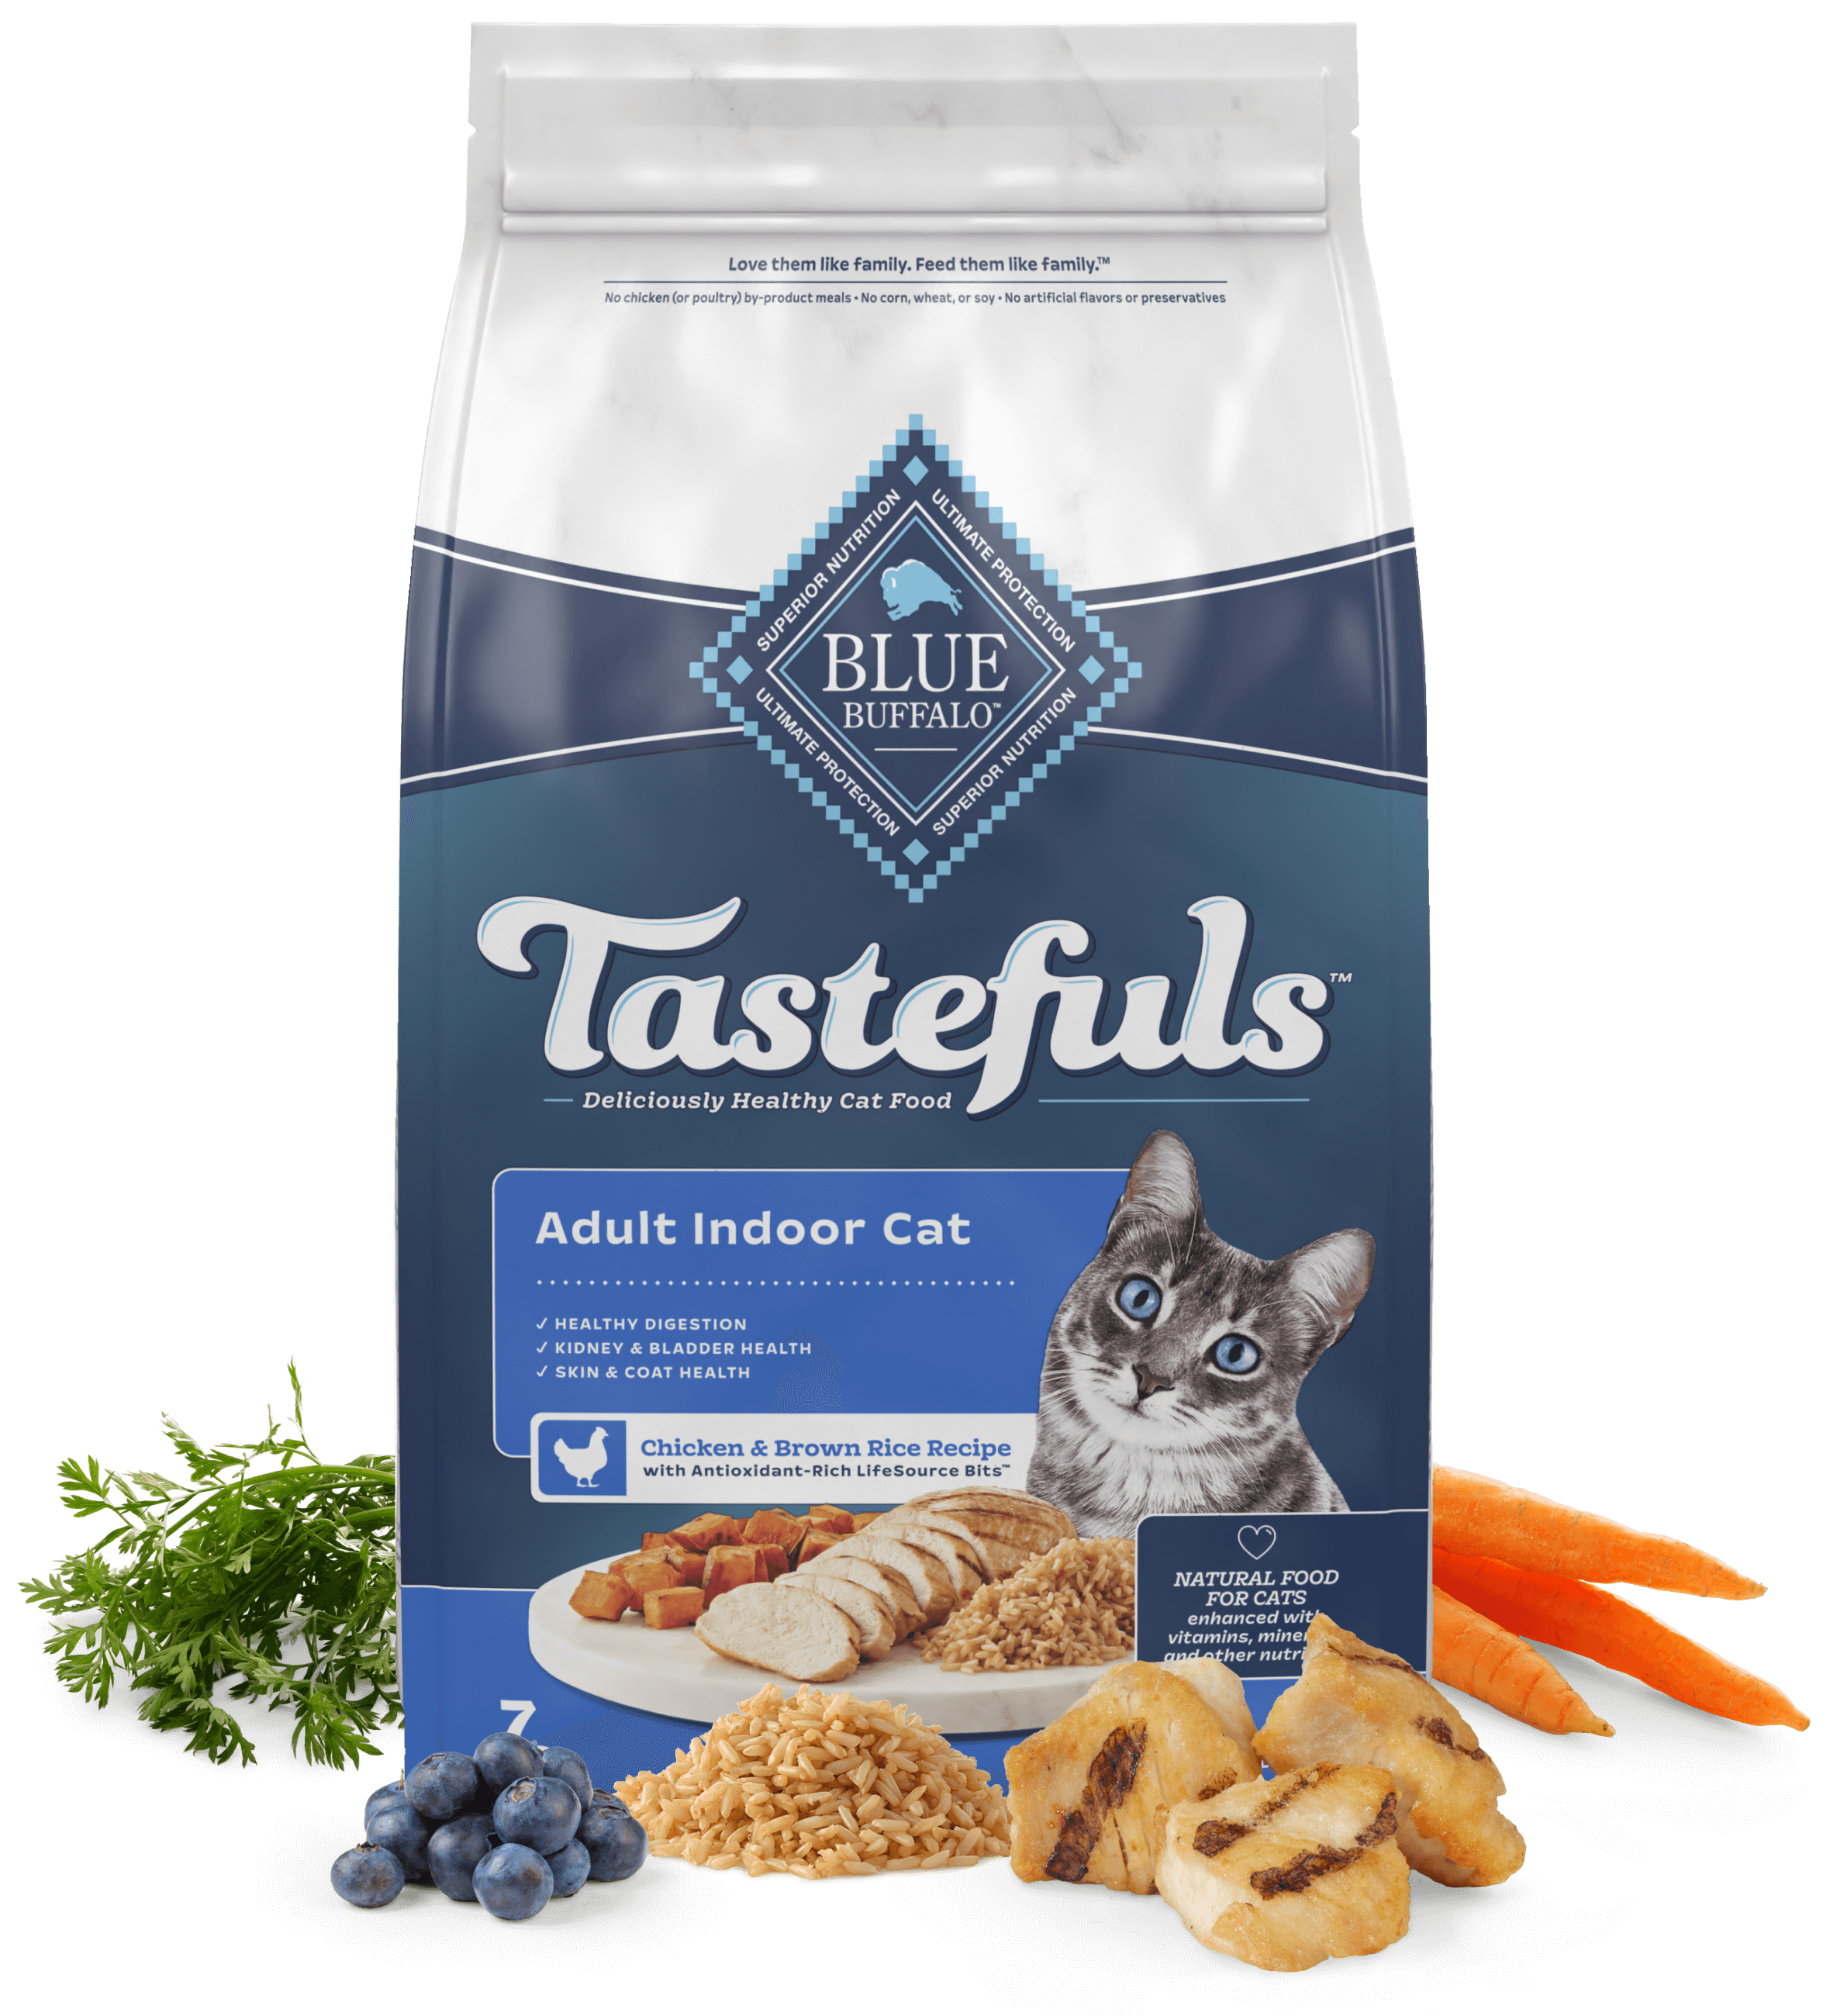 A bag of Blue Buffalo Tastefuls Adult Indoor Cat food, Chicken & Brown Rice Recipe, with images of fresh chicken, carrots, brown rice, and blueberries.